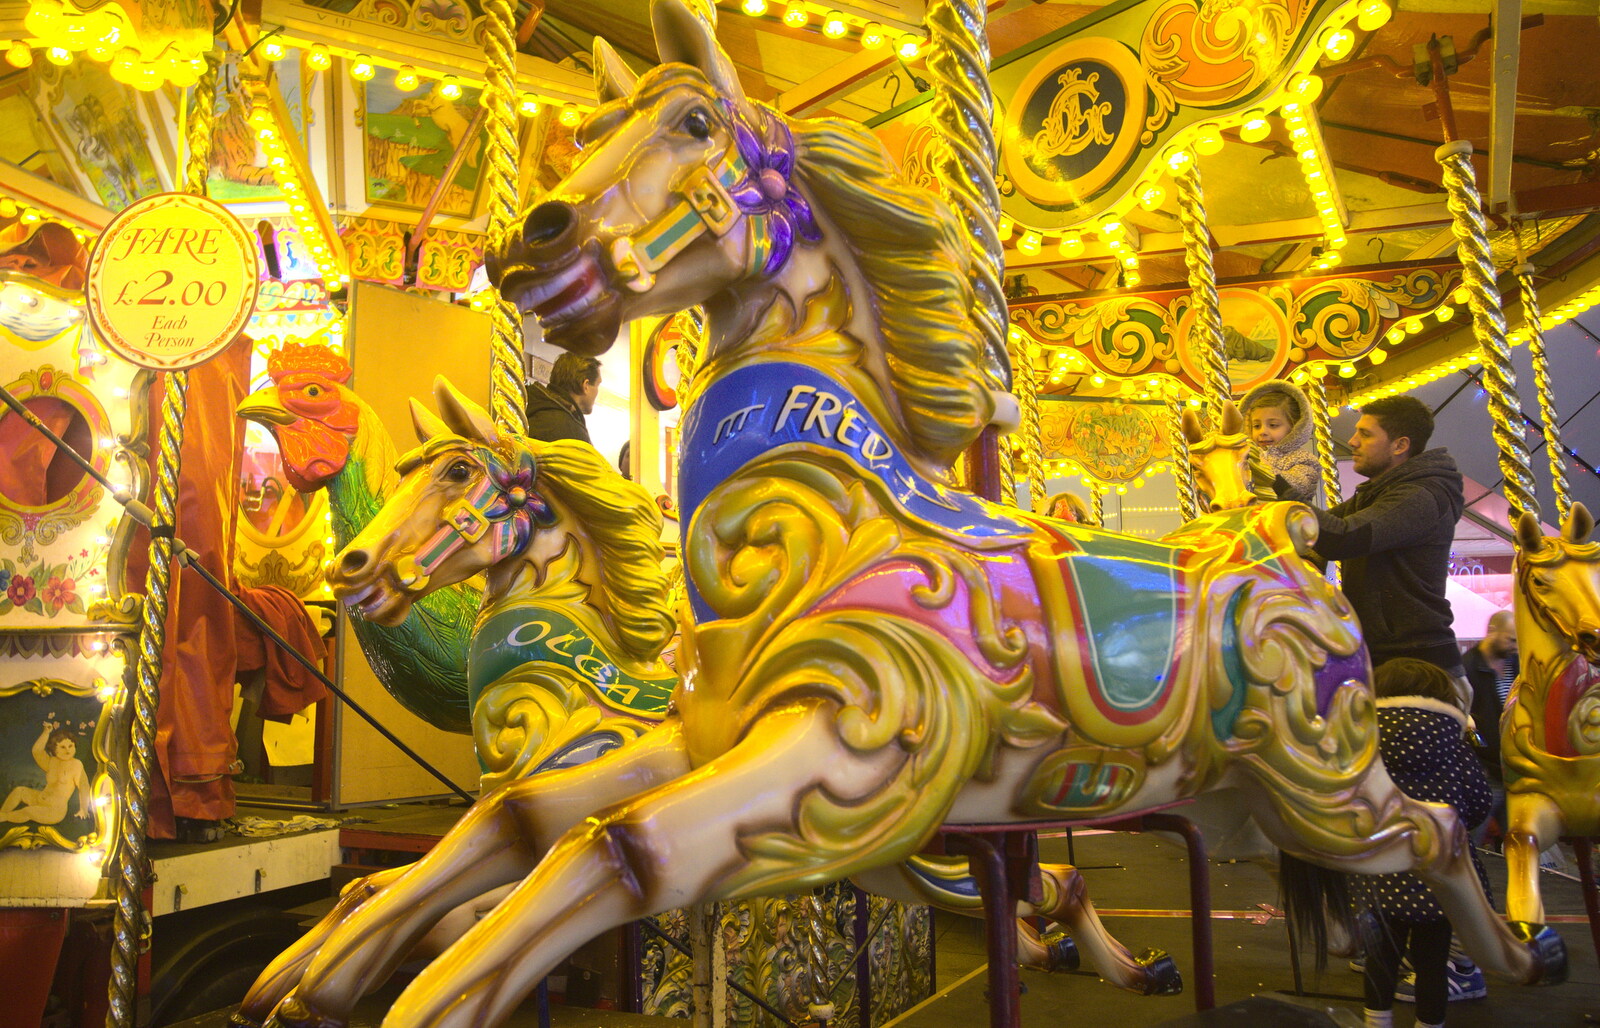 Fred the carousel horse from A Trip to Ickworth House, Horringer, Suffolk - 30th December 2016